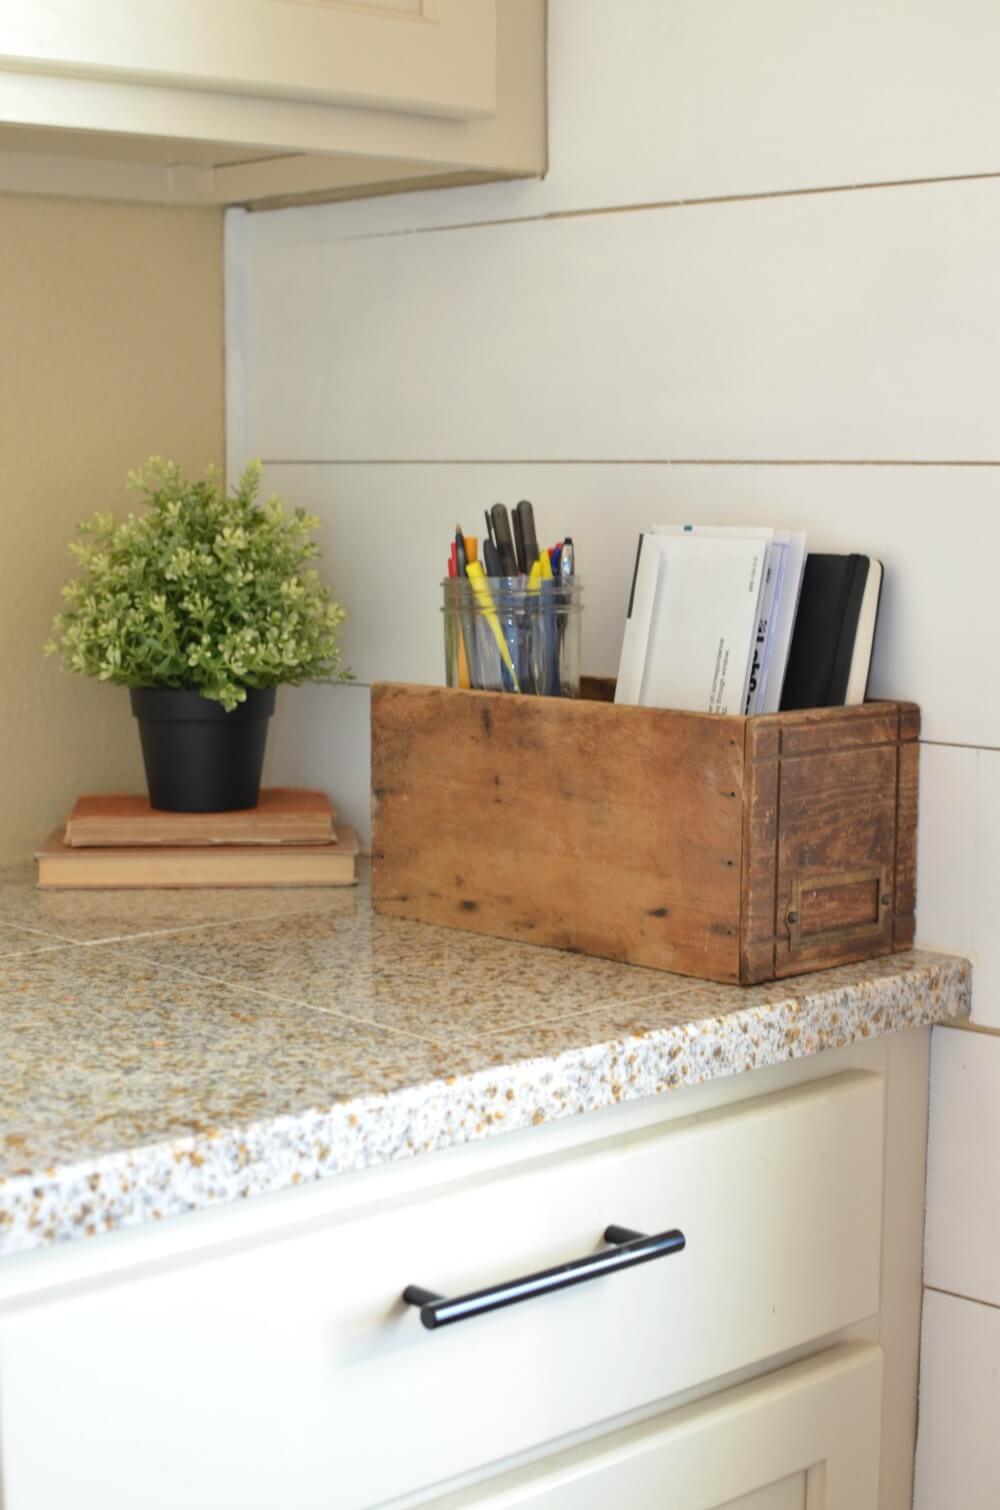 Kitchen Countertop Organizing Idea for Notes